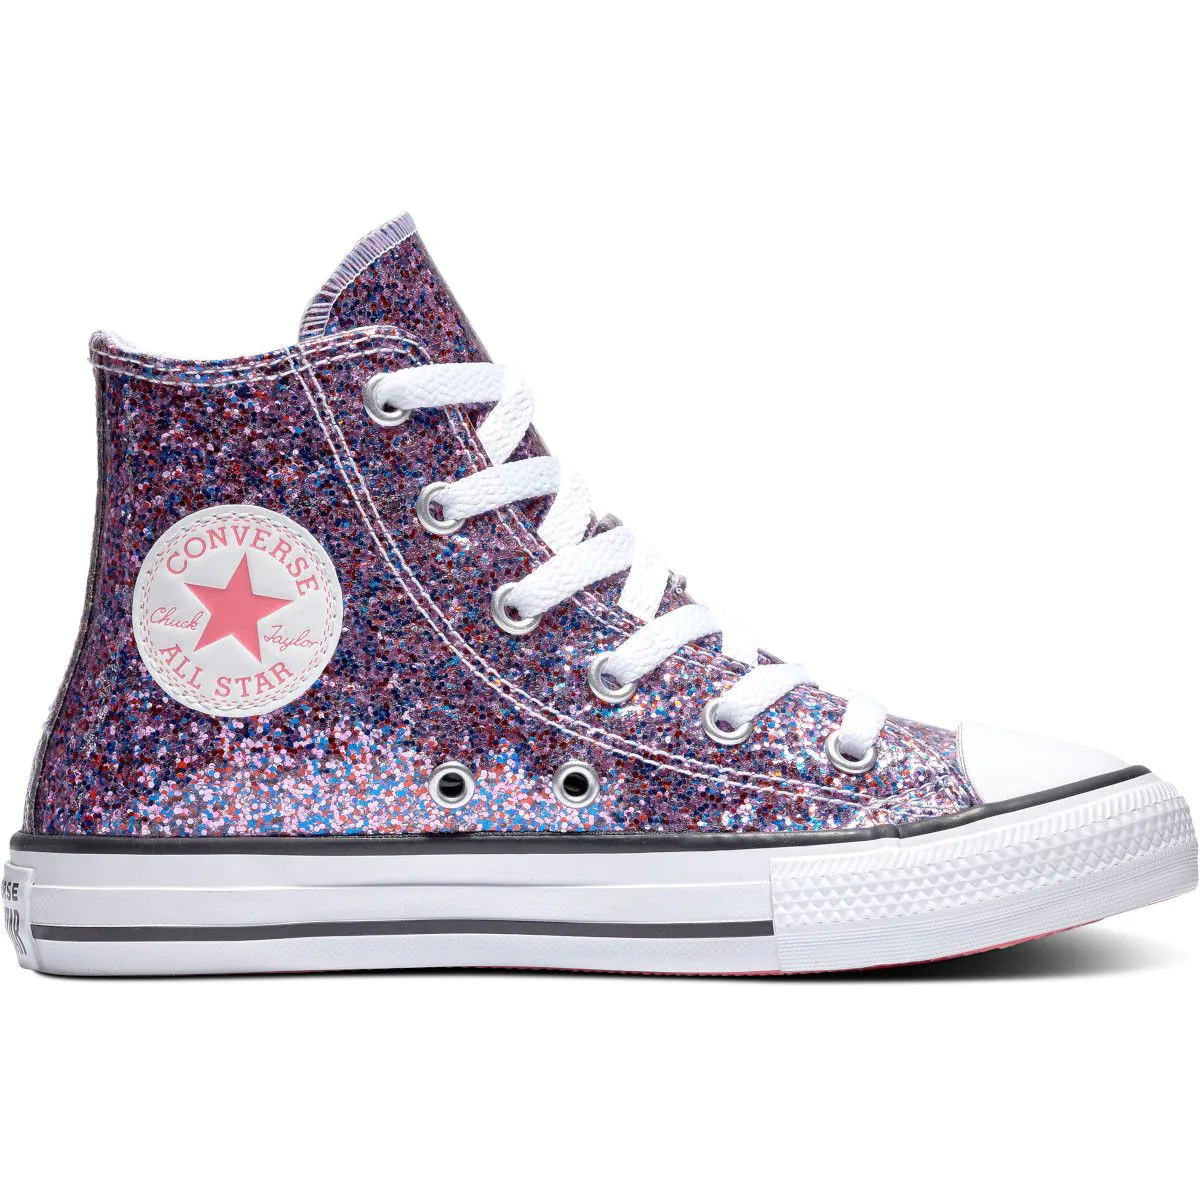 Converse Chuck Taylor All Star Coated Glitter HT Kid's Shoe